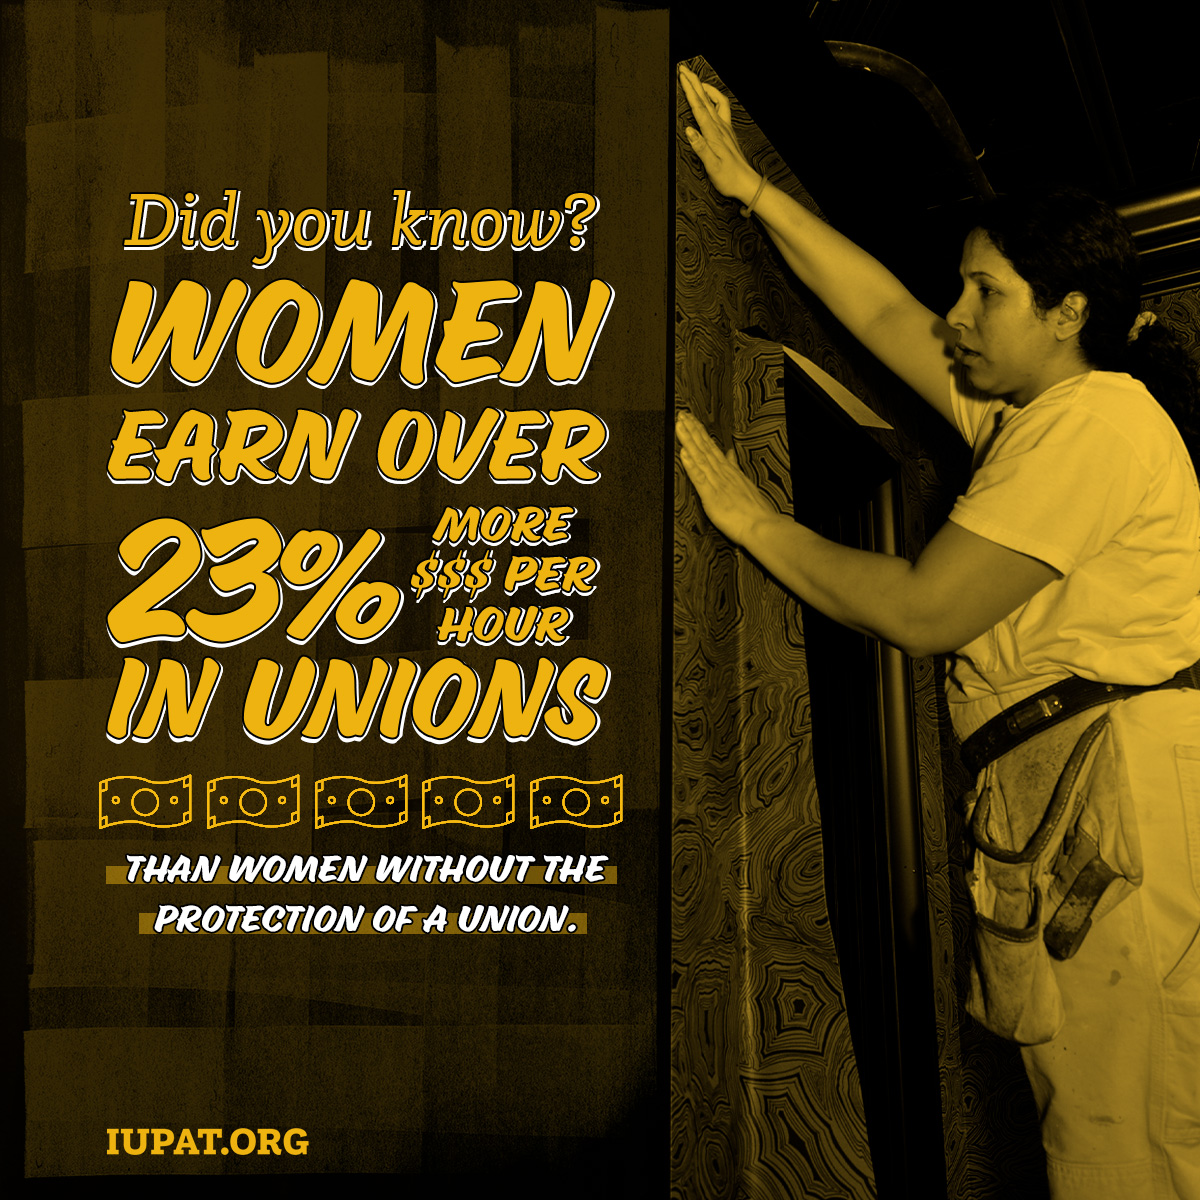 A union card is the greatest tool we have to ensure gender pay equity. Unionized women earn 23% more hourly than those without a union!